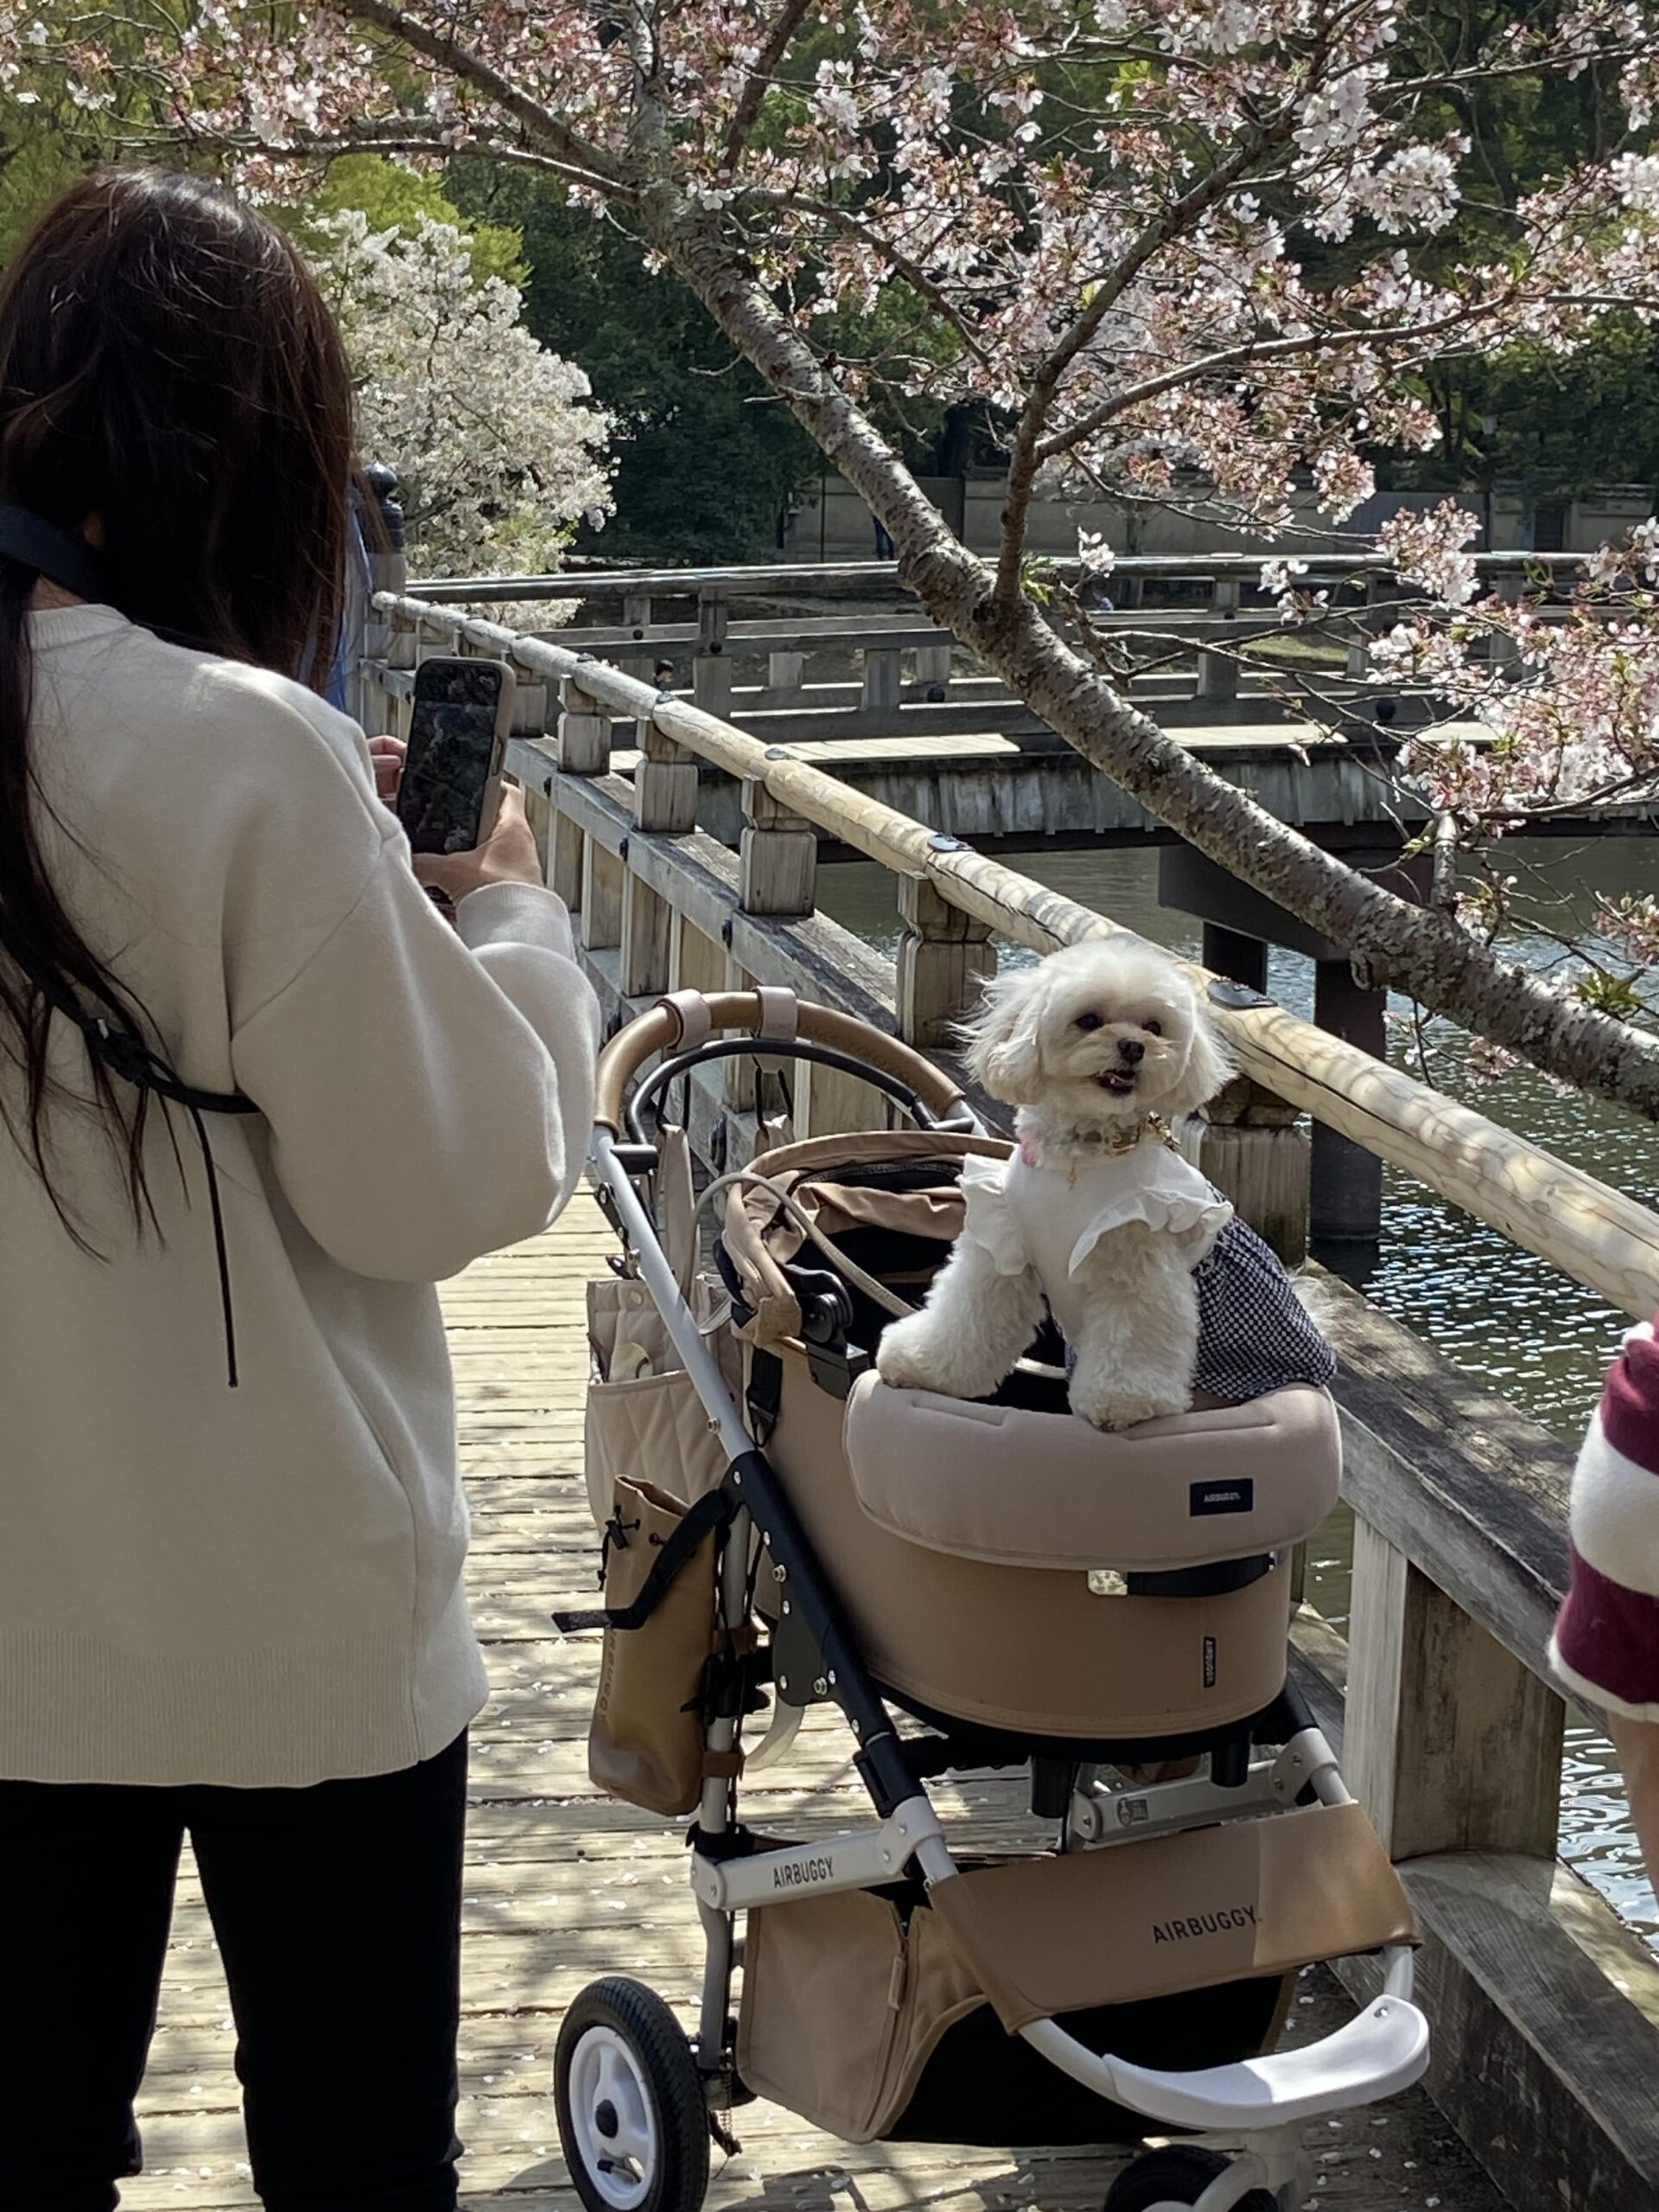 japan cherry blossoms japanese and their spoilt pet dogs pooches japanese dogs maltese kyoto nara deer park